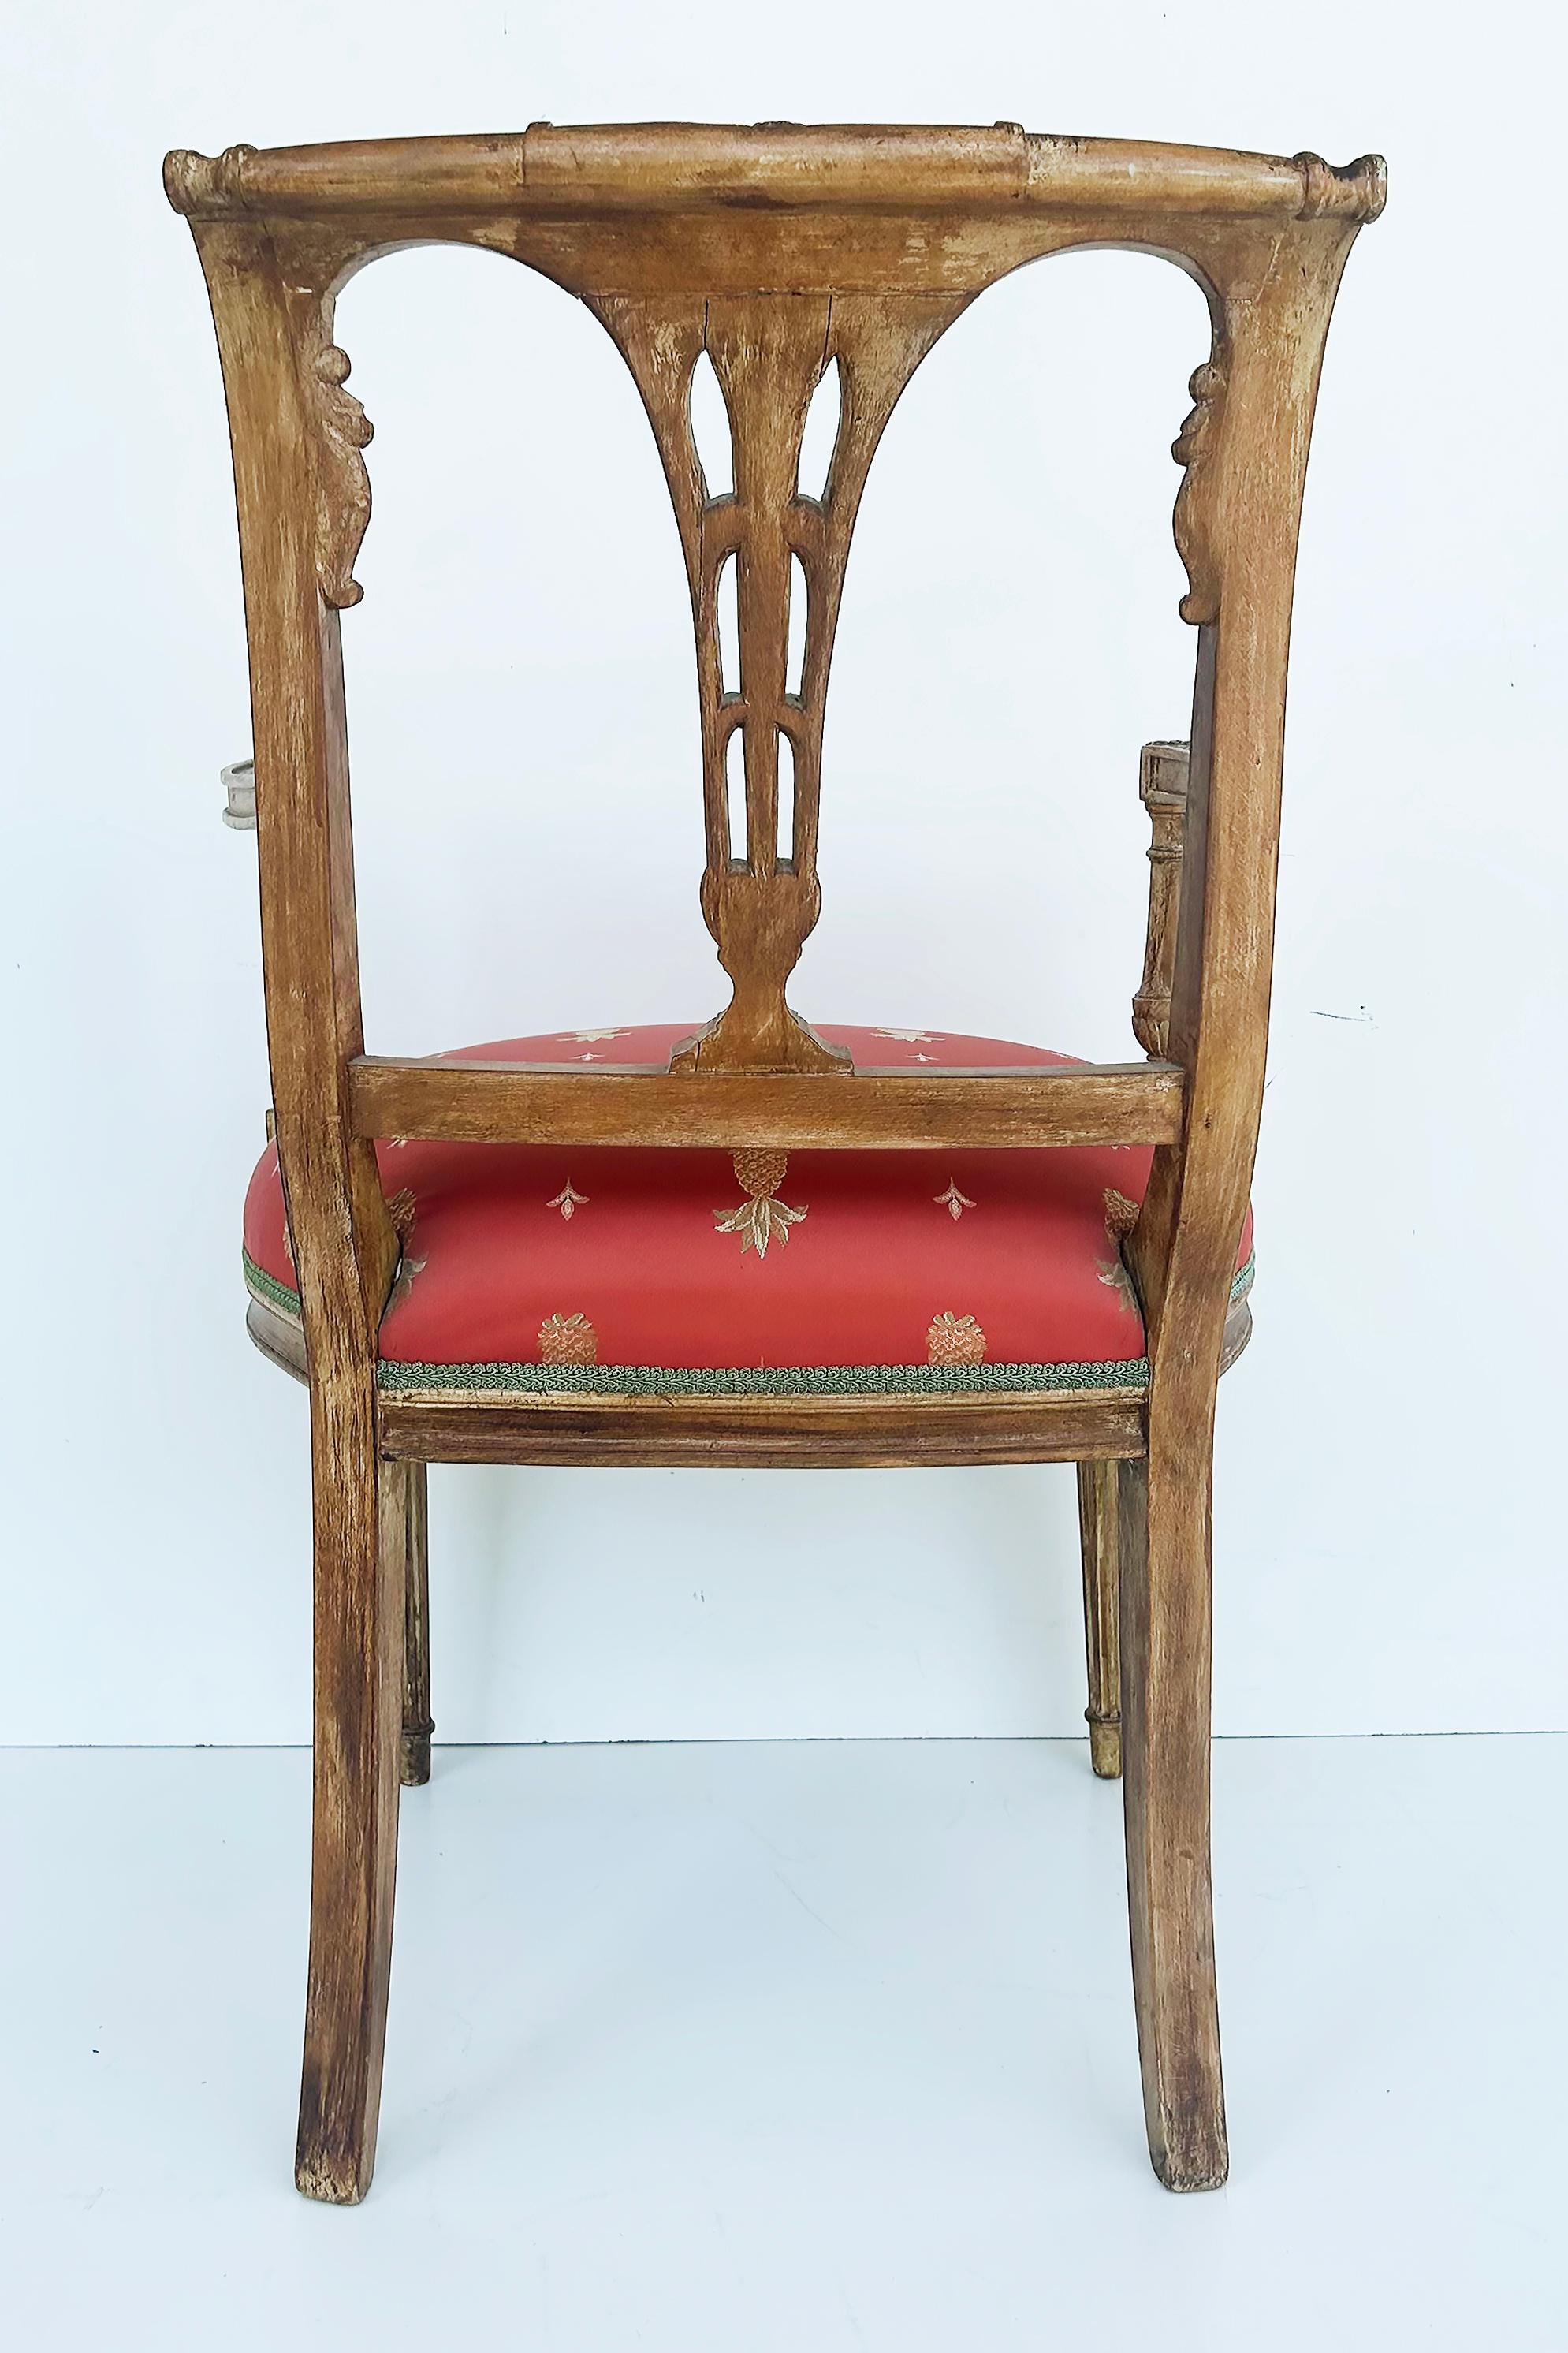 Antique Carved Venetian Plastered Wood Armchairs with Pineapple Seats For Sale 1